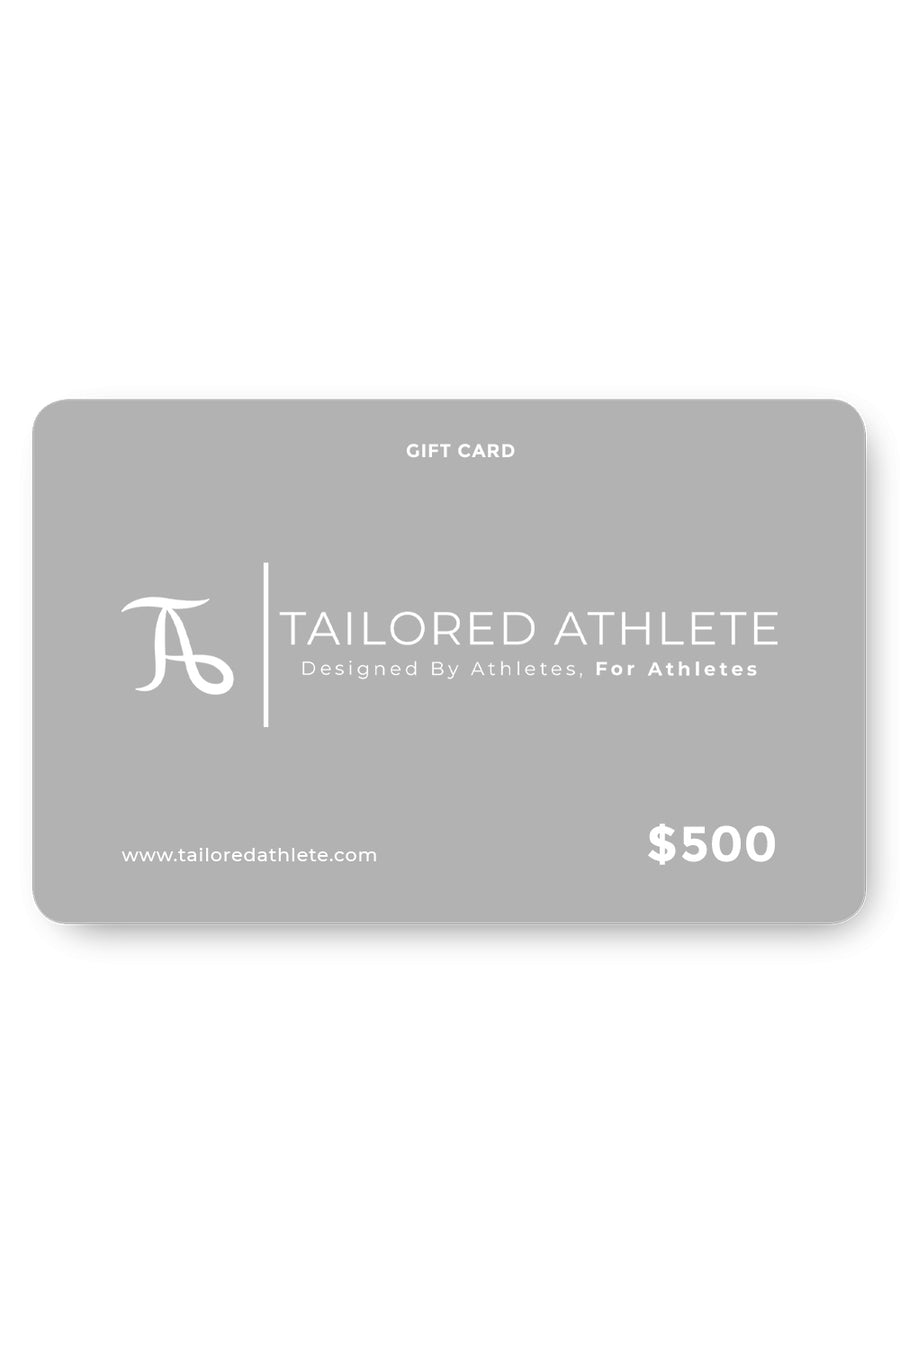 TAILORED ATHLETE Gift Card - TAILORED ATHLETE - USA